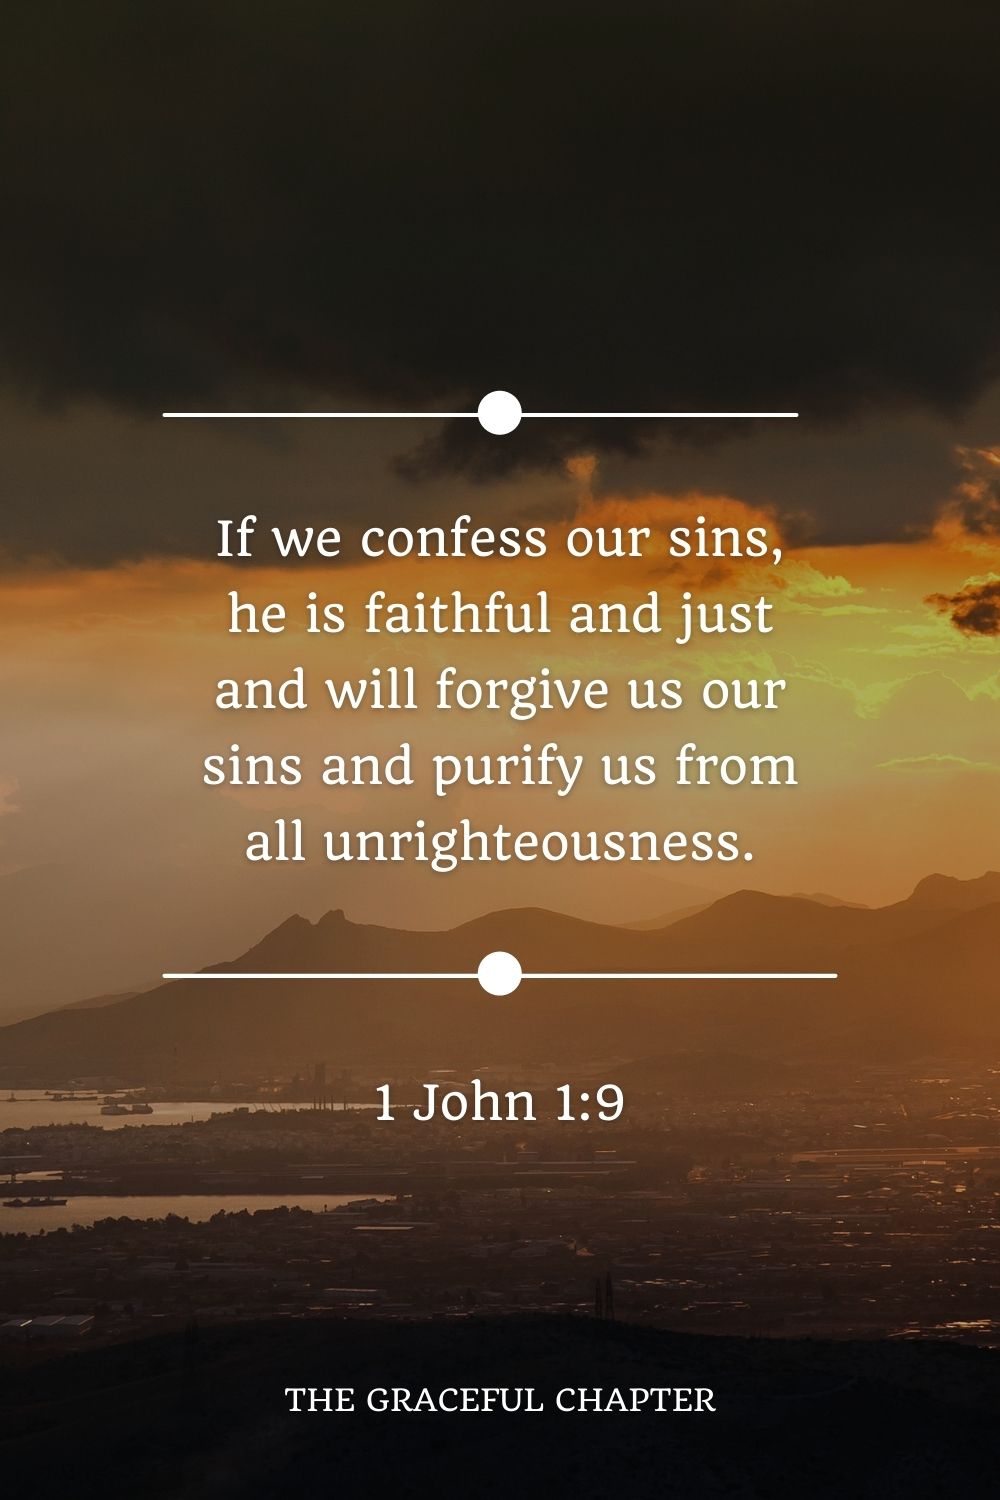 If we confess our sins, he is faithful and just and will forgive us our sins and purify us from all unrighteousness. 1 John 1:9